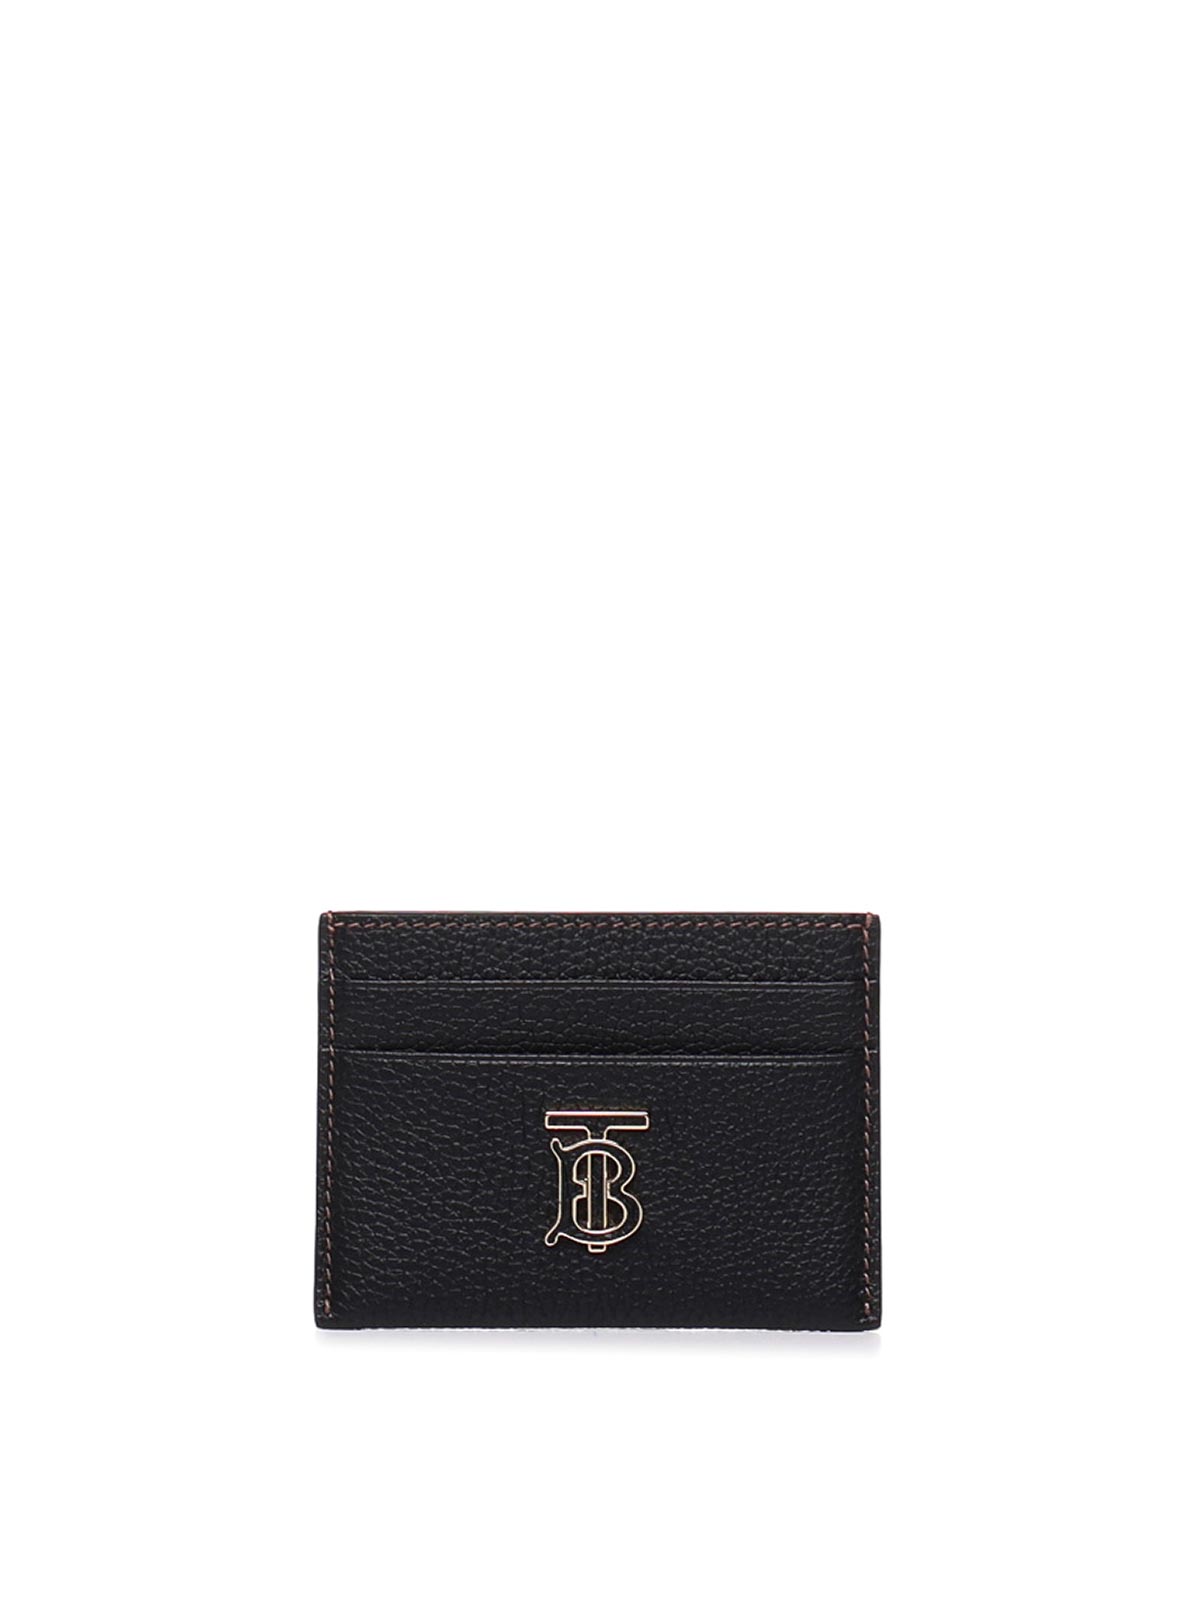 Burberry Tb Credit Card Holder In Grained Leather In Black